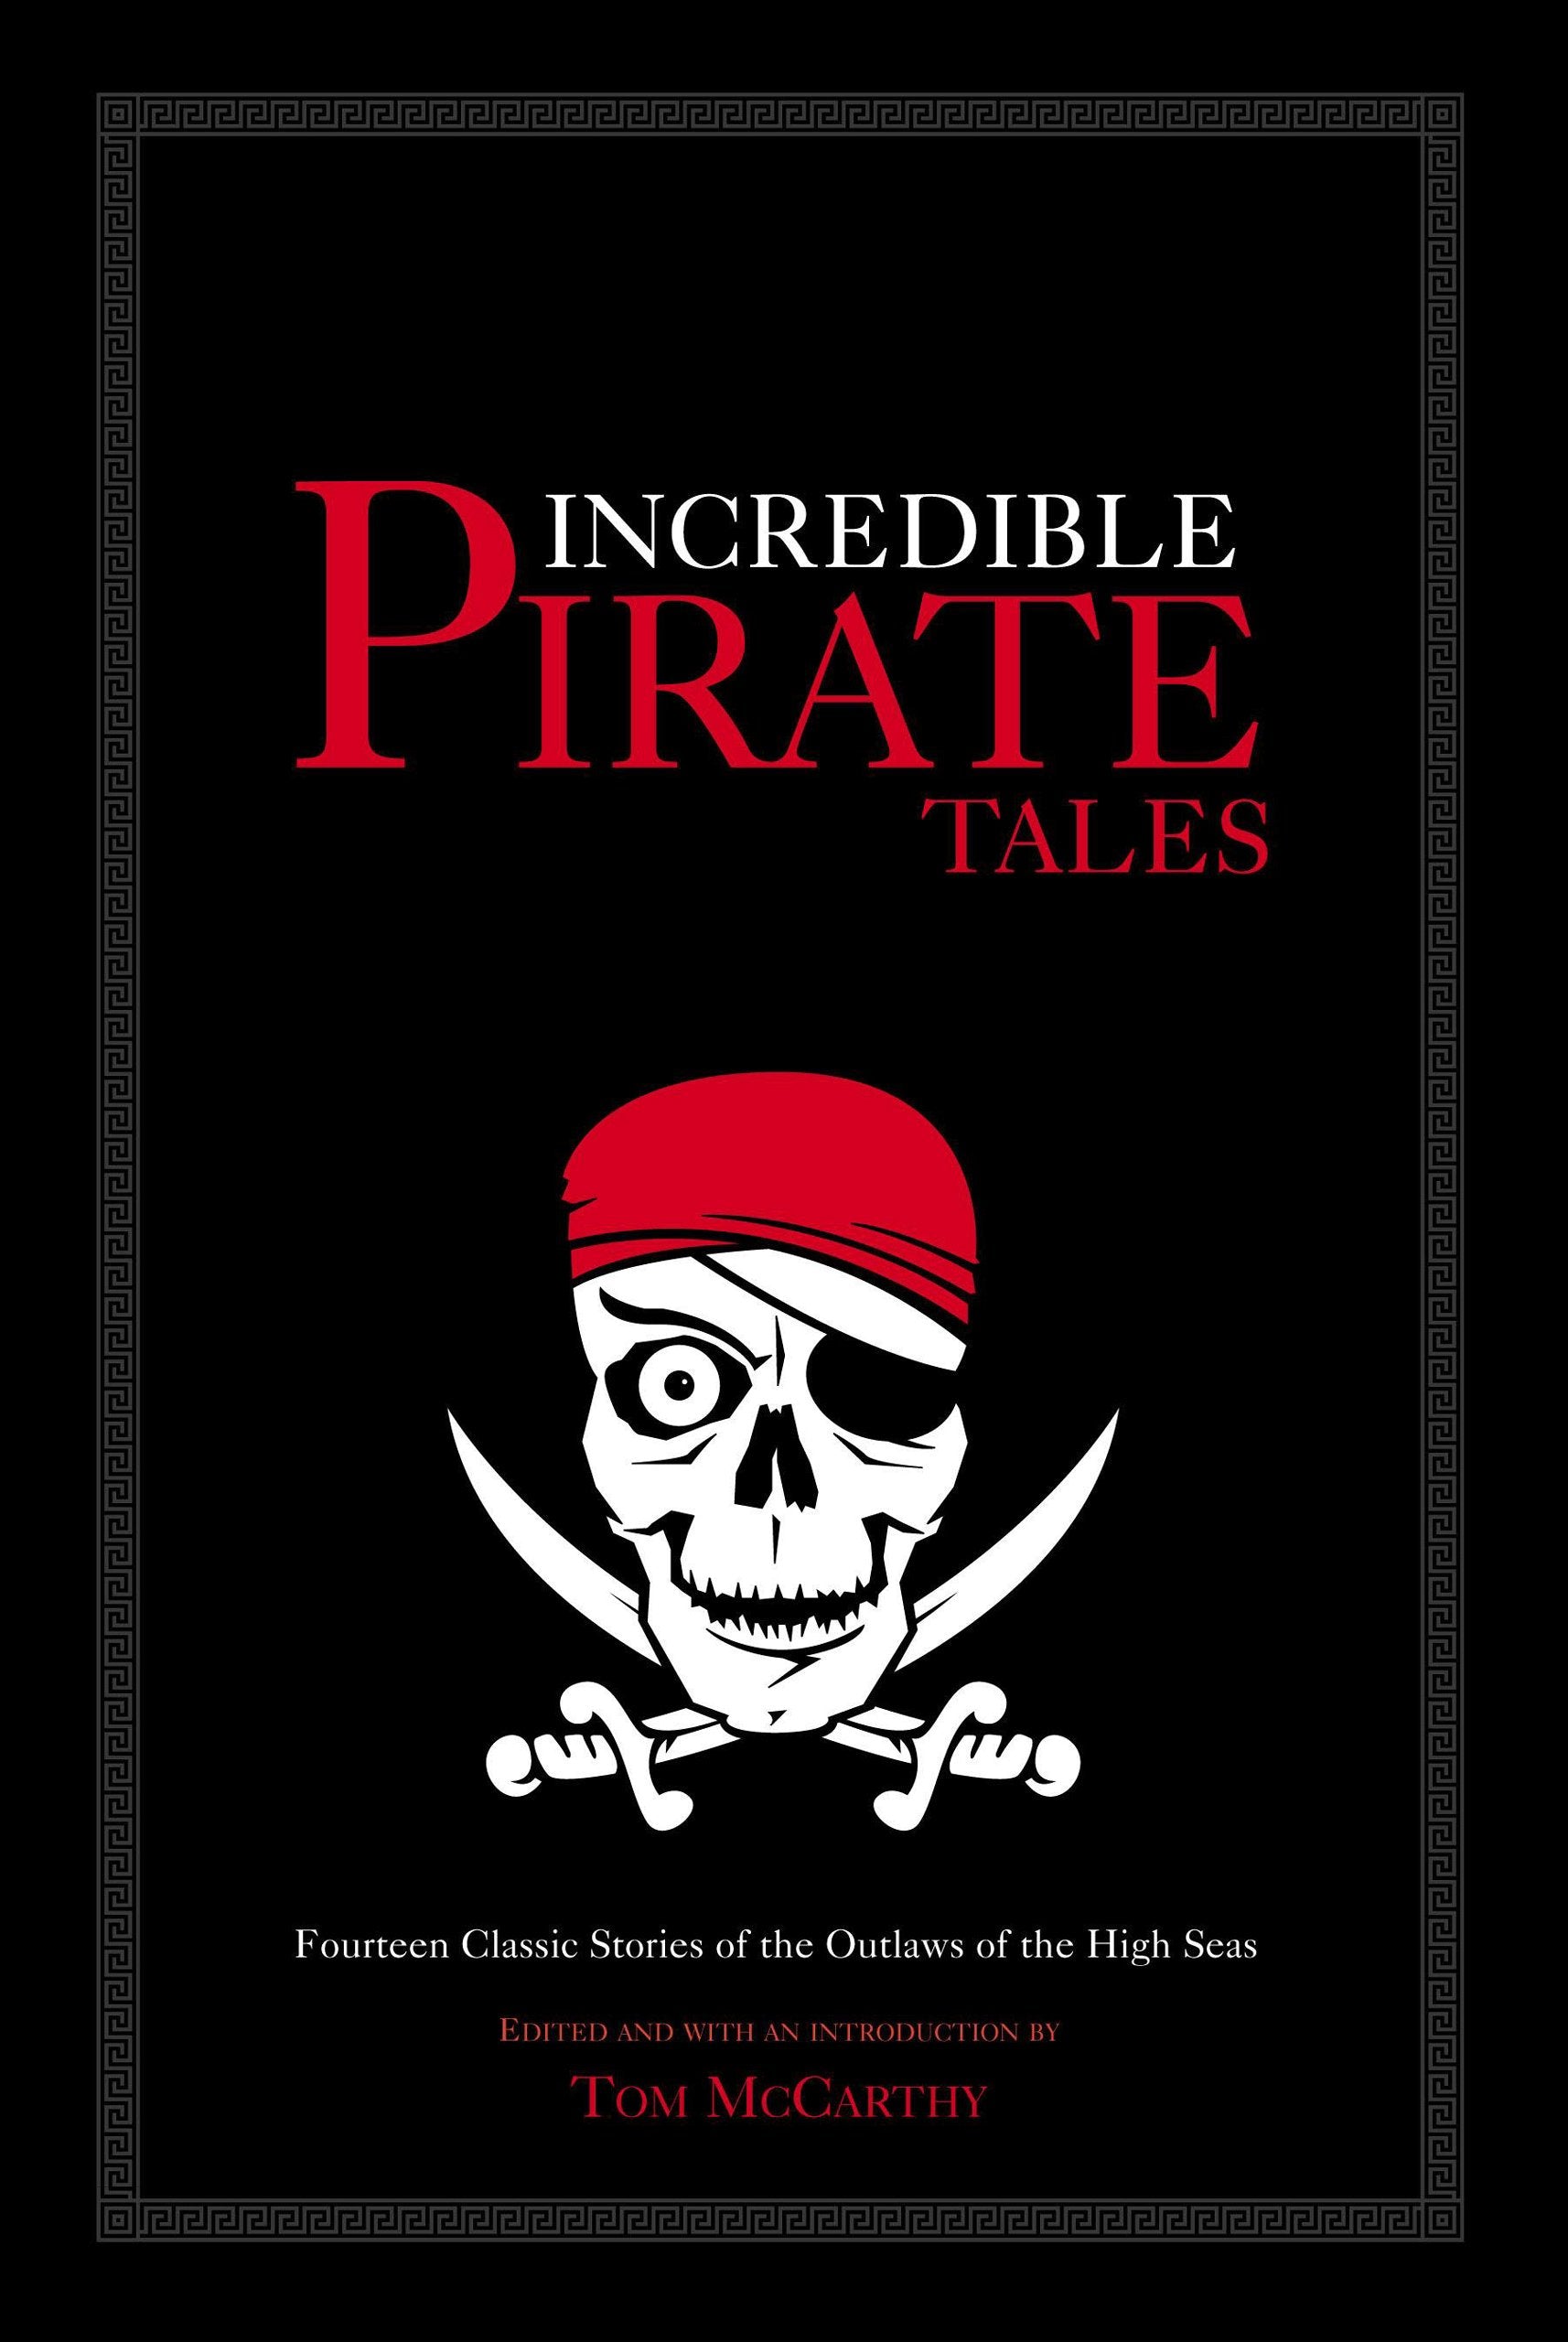 Incredible Pirate Tales: Fourteen Classic Stories of the Outlaws of the High Seas (Incredible Tales)